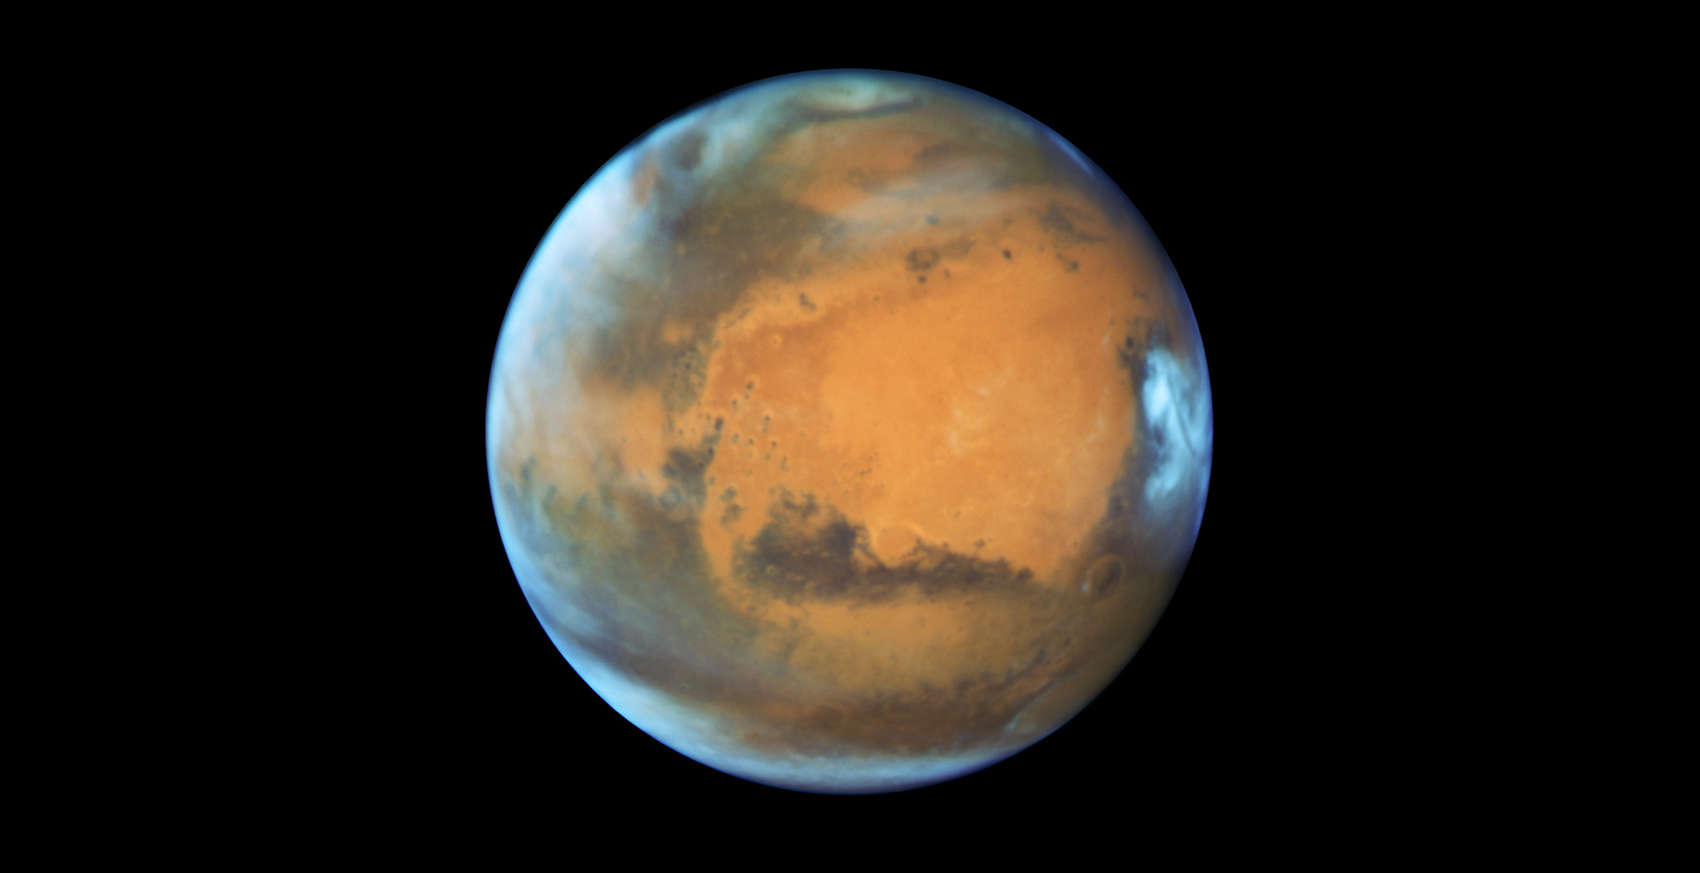 Hubble Space Telescope image of Mars taken near its closest approach to Earth in 2016. Credit: NASA, ESA, the Hubble Heritage Team (STScI/AURA), J. Bell (ASU), and M. Wolff (Space Science Institute)